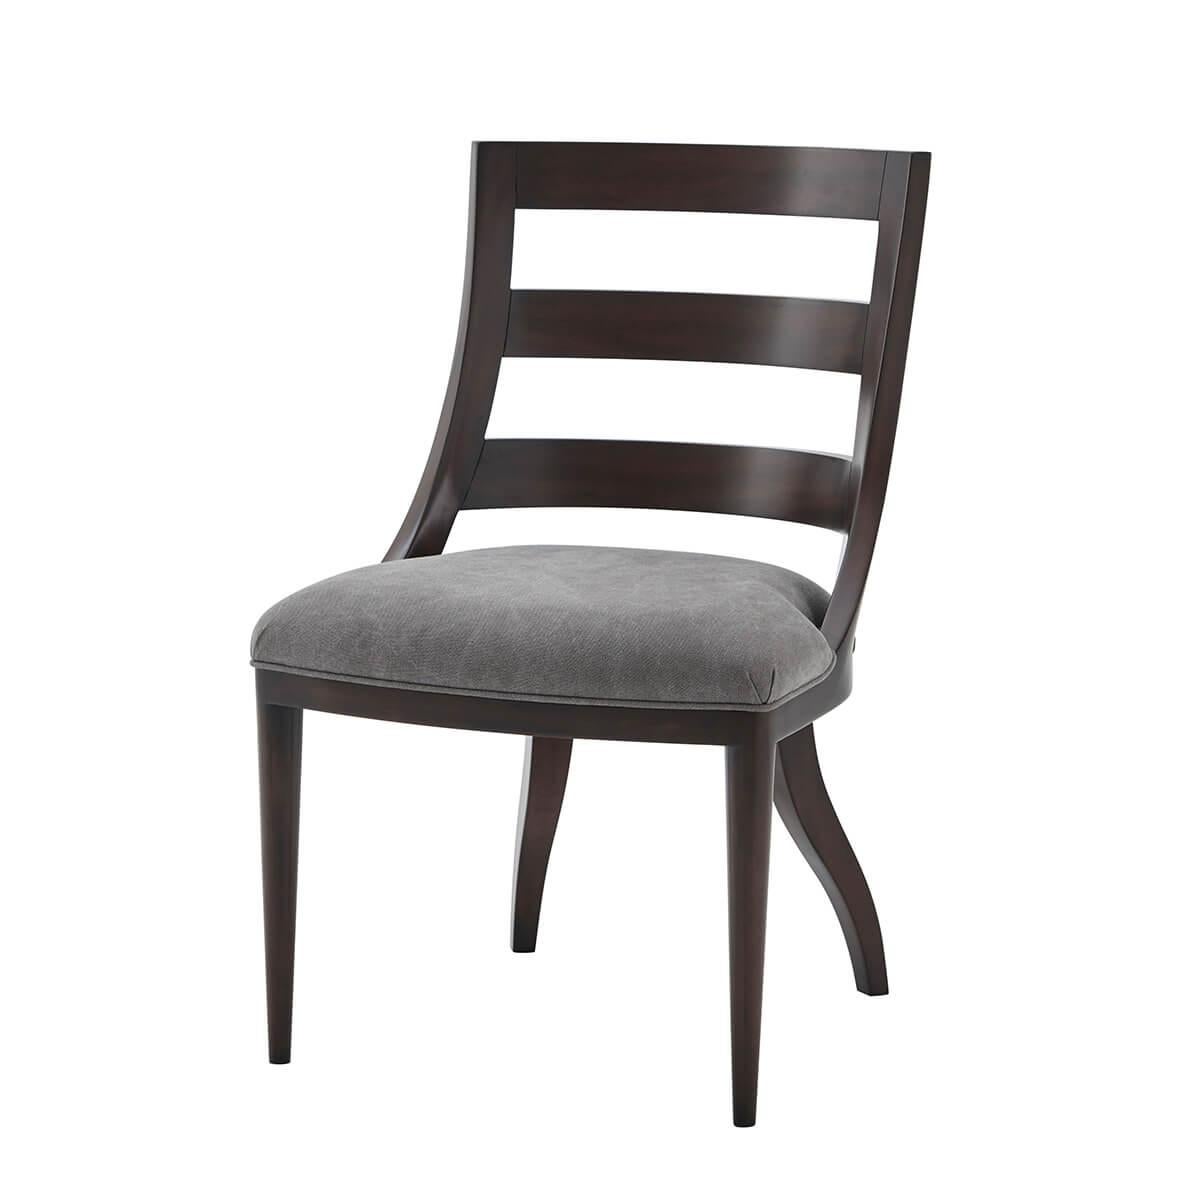 Two Scoop Back Dining Chair with a mahogany frame in a dark mocha finish, with a curved slatted backrest, with an upholstered cushion seat with curved splayed rear legs and tapered front legs.

Dimensions: 21